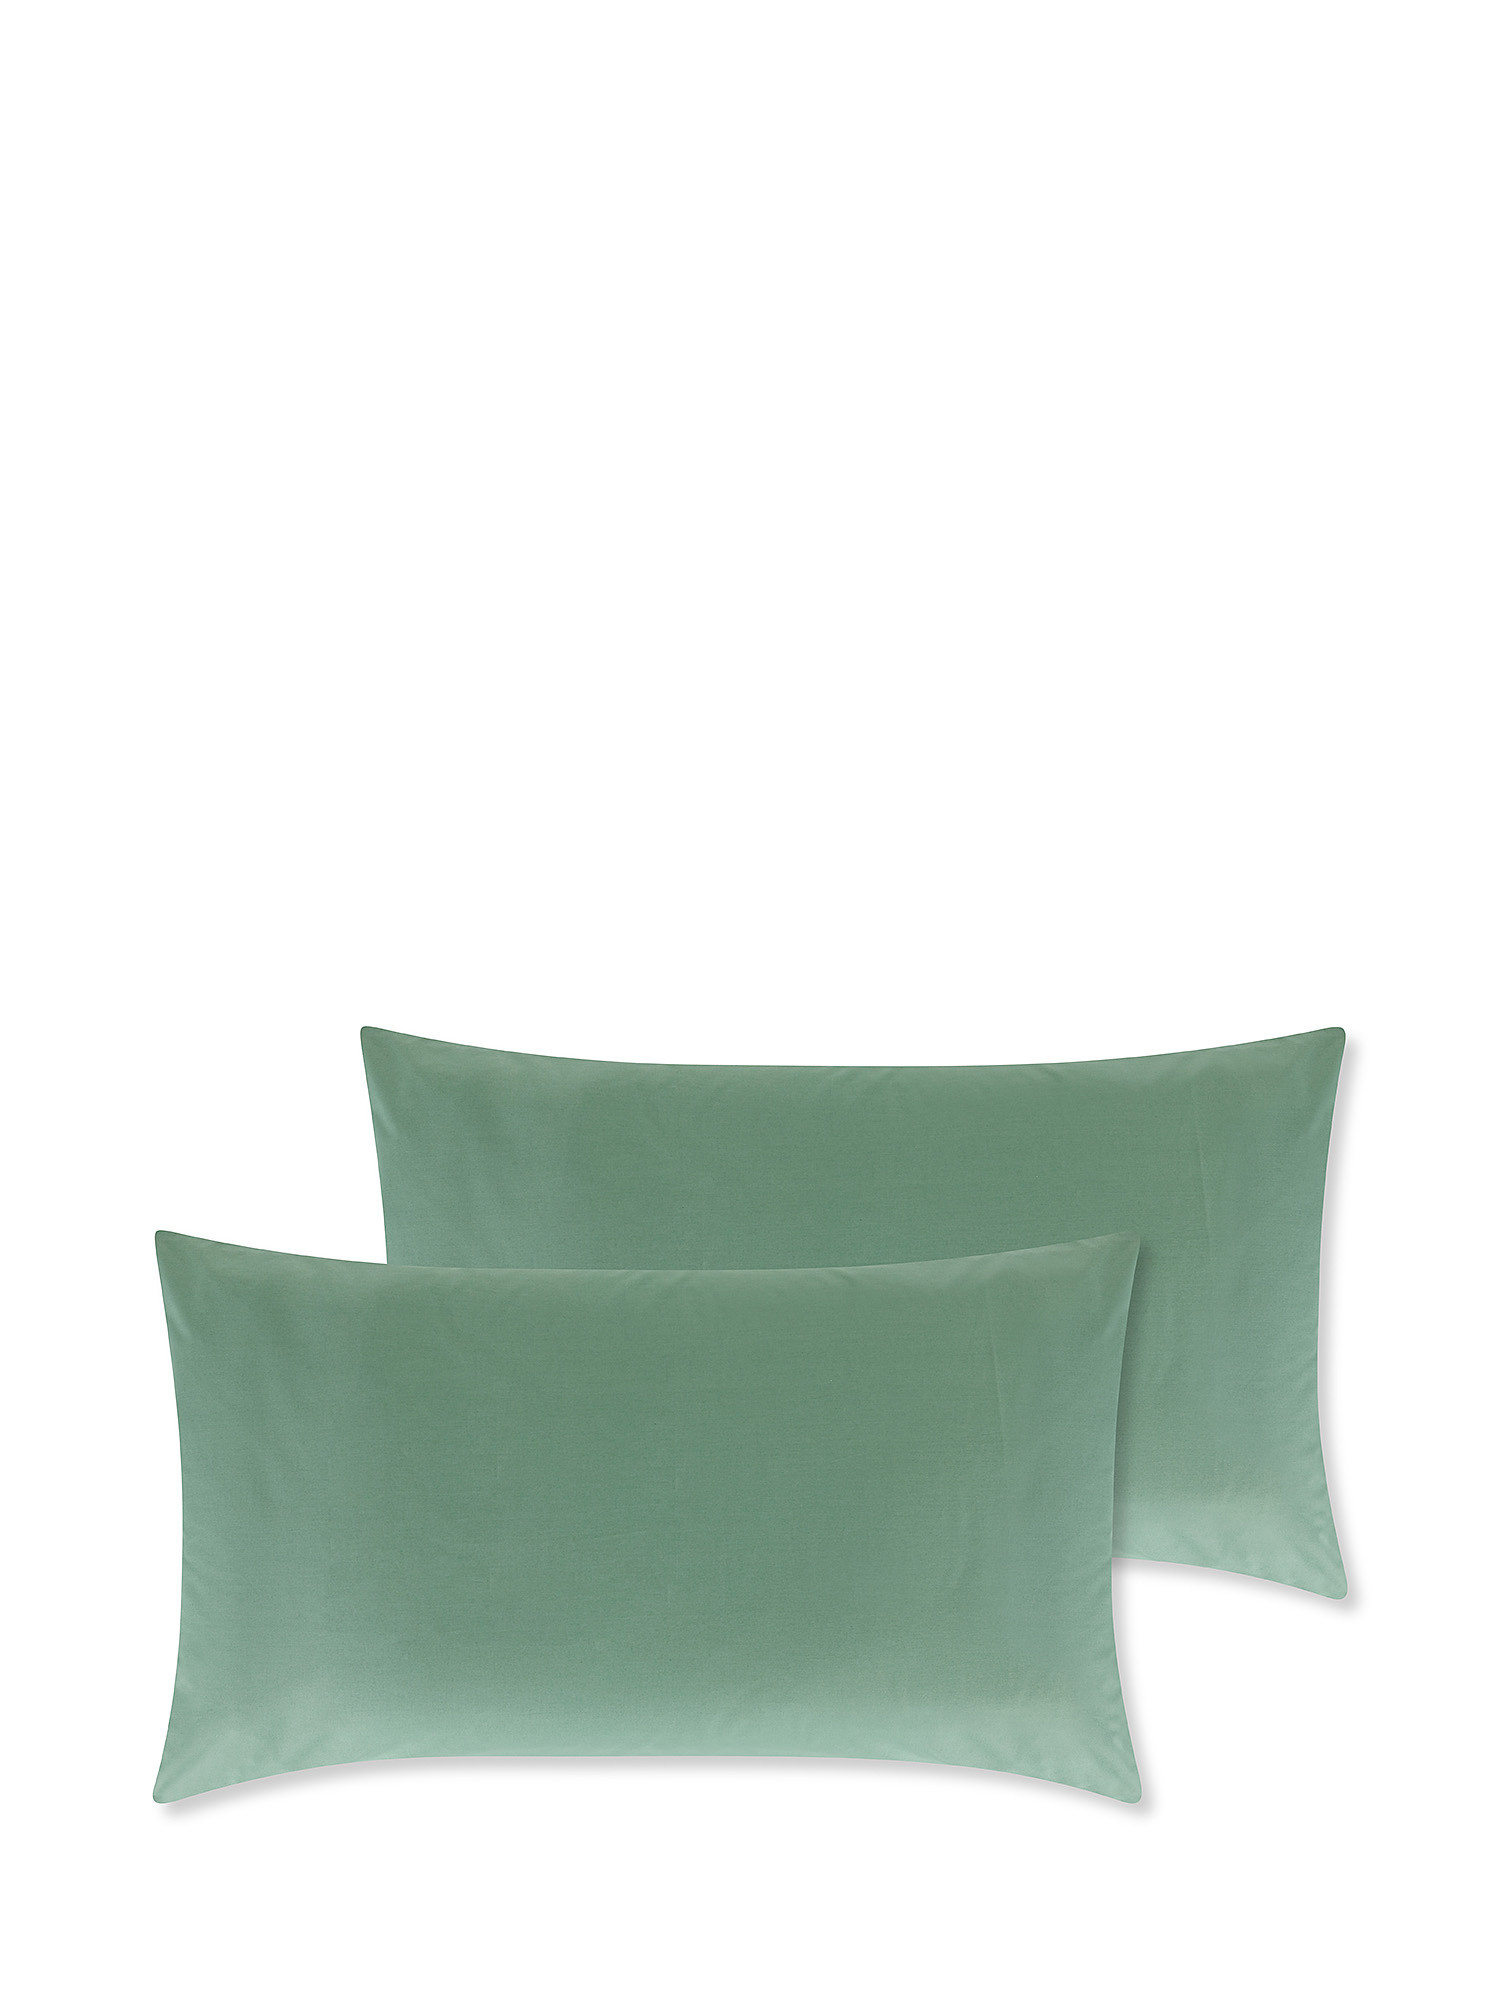 Set of 2 solid color cotton percale pillowcases, Green, large image number 0